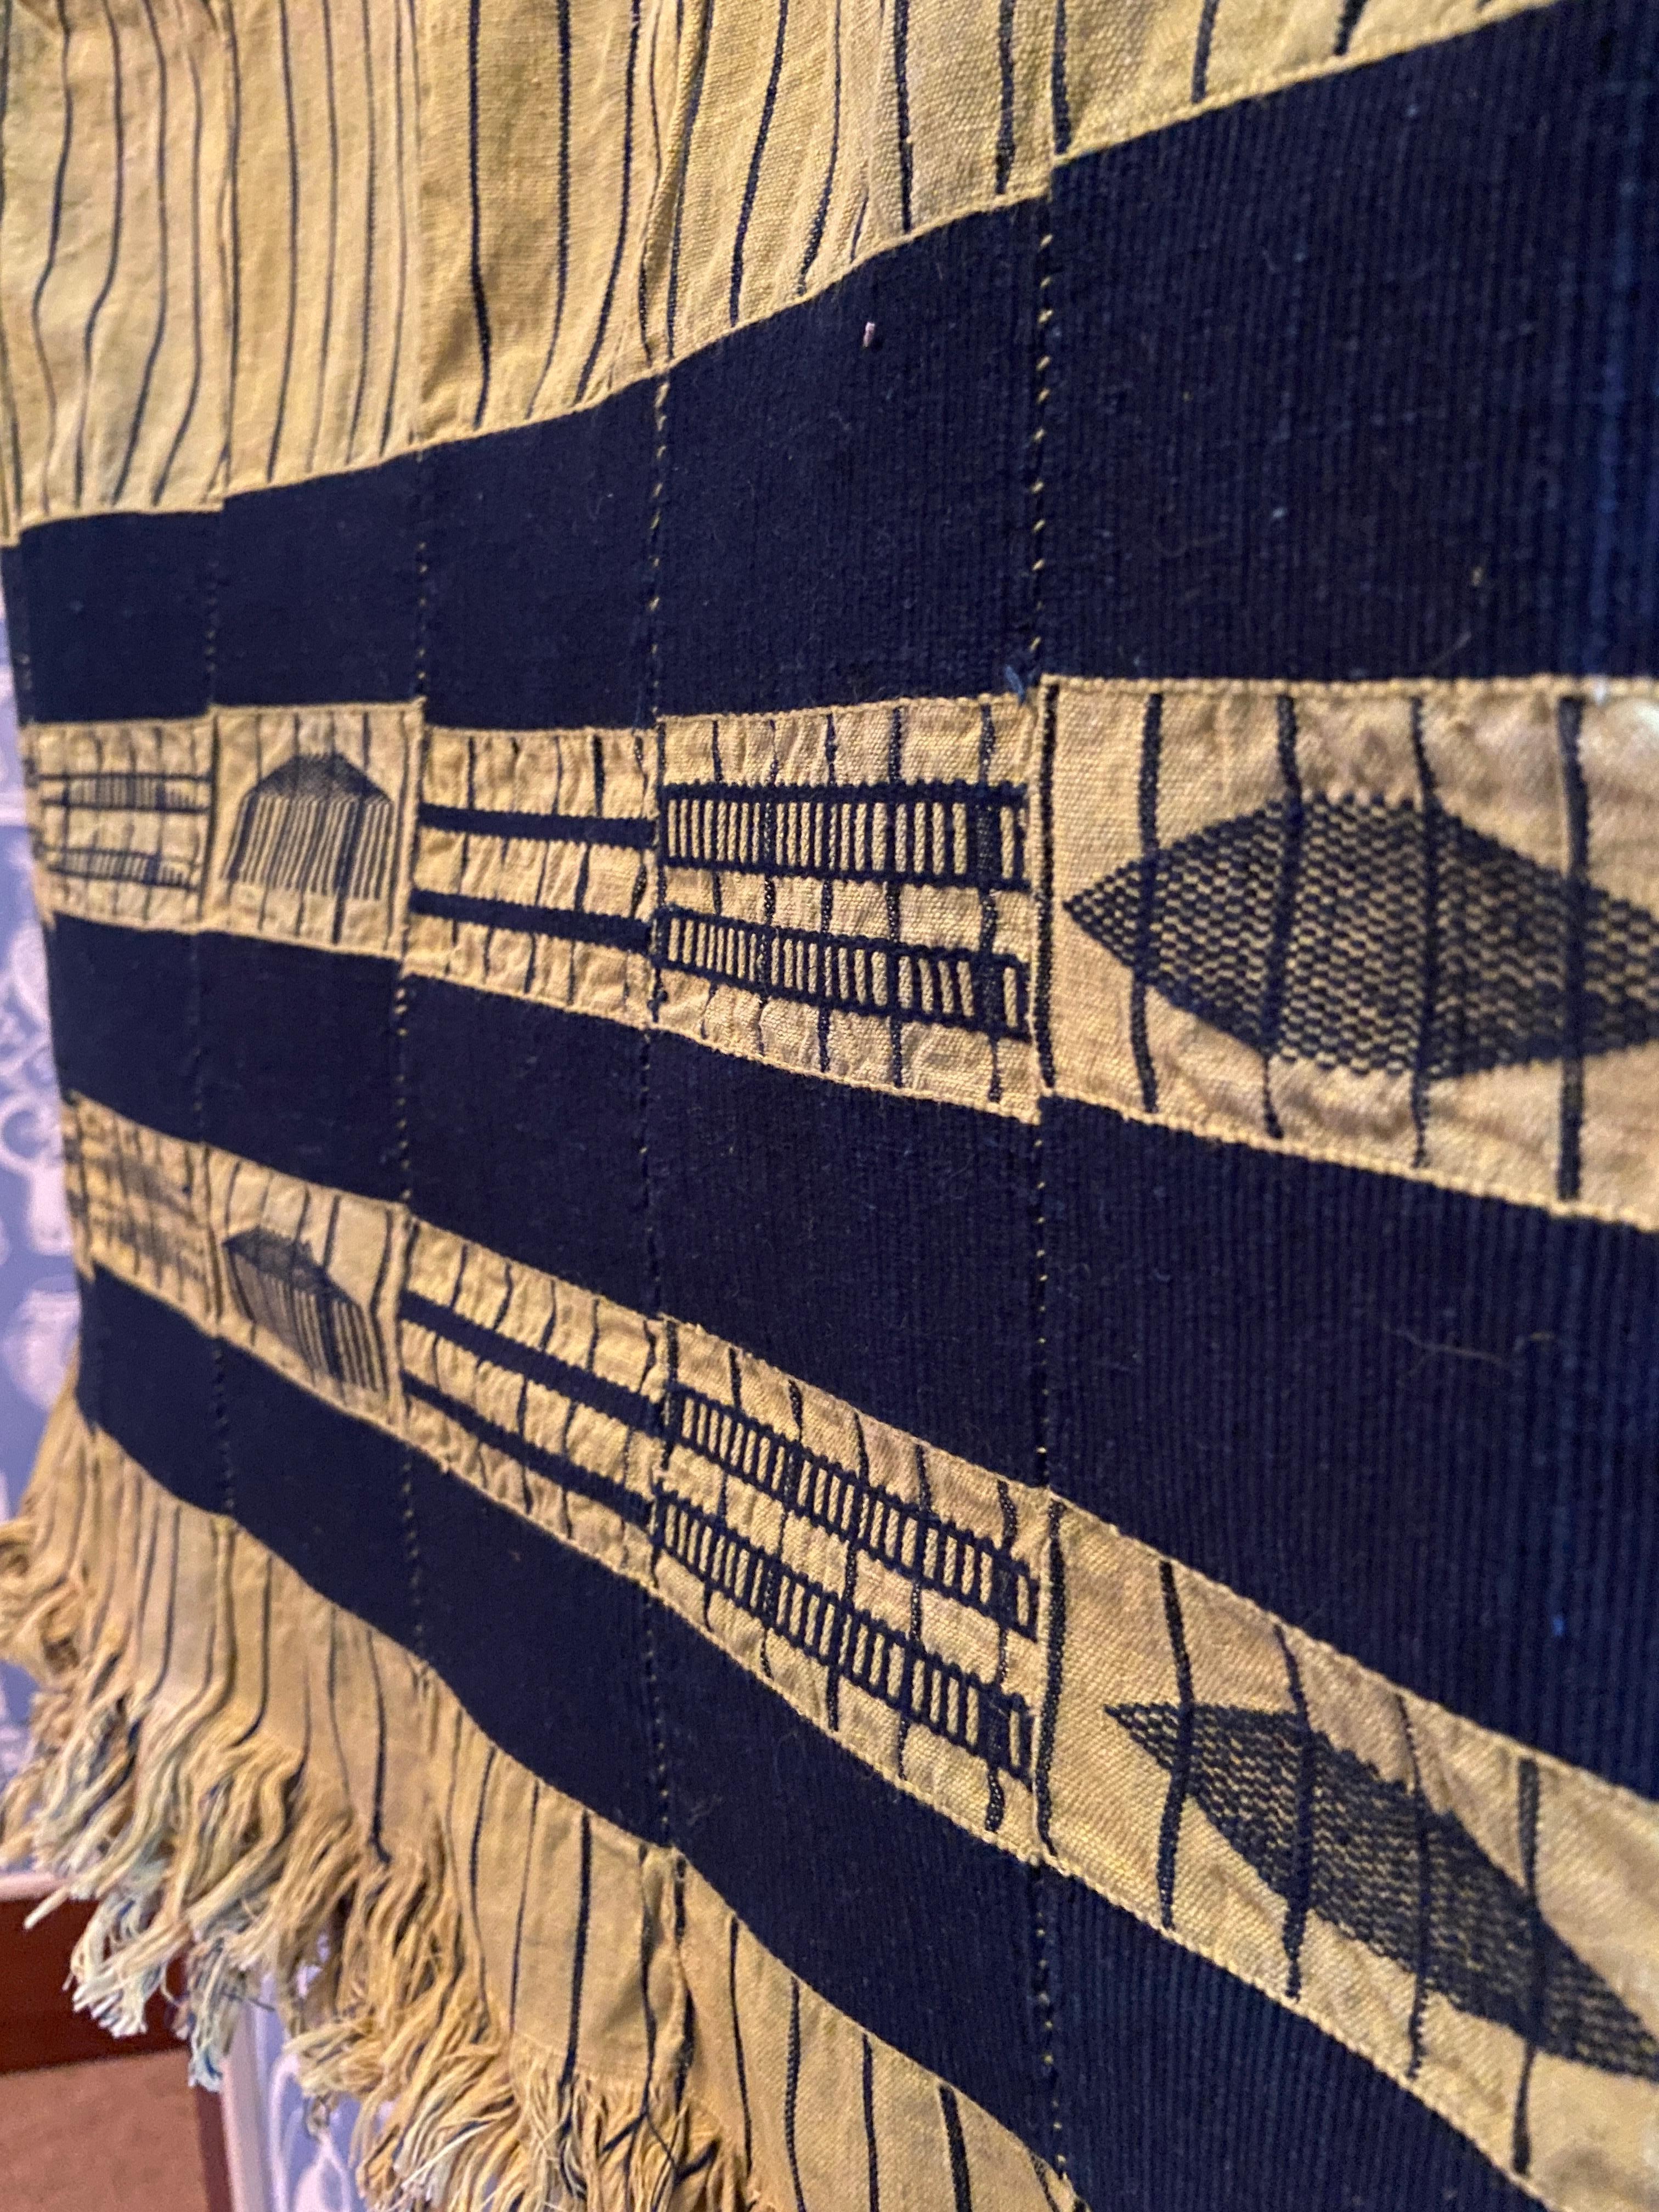 Mid-20th Century Vintage Ewe Kente Men’s Cloth in Blue and Yellow Striped Textile, Ghana 1950's